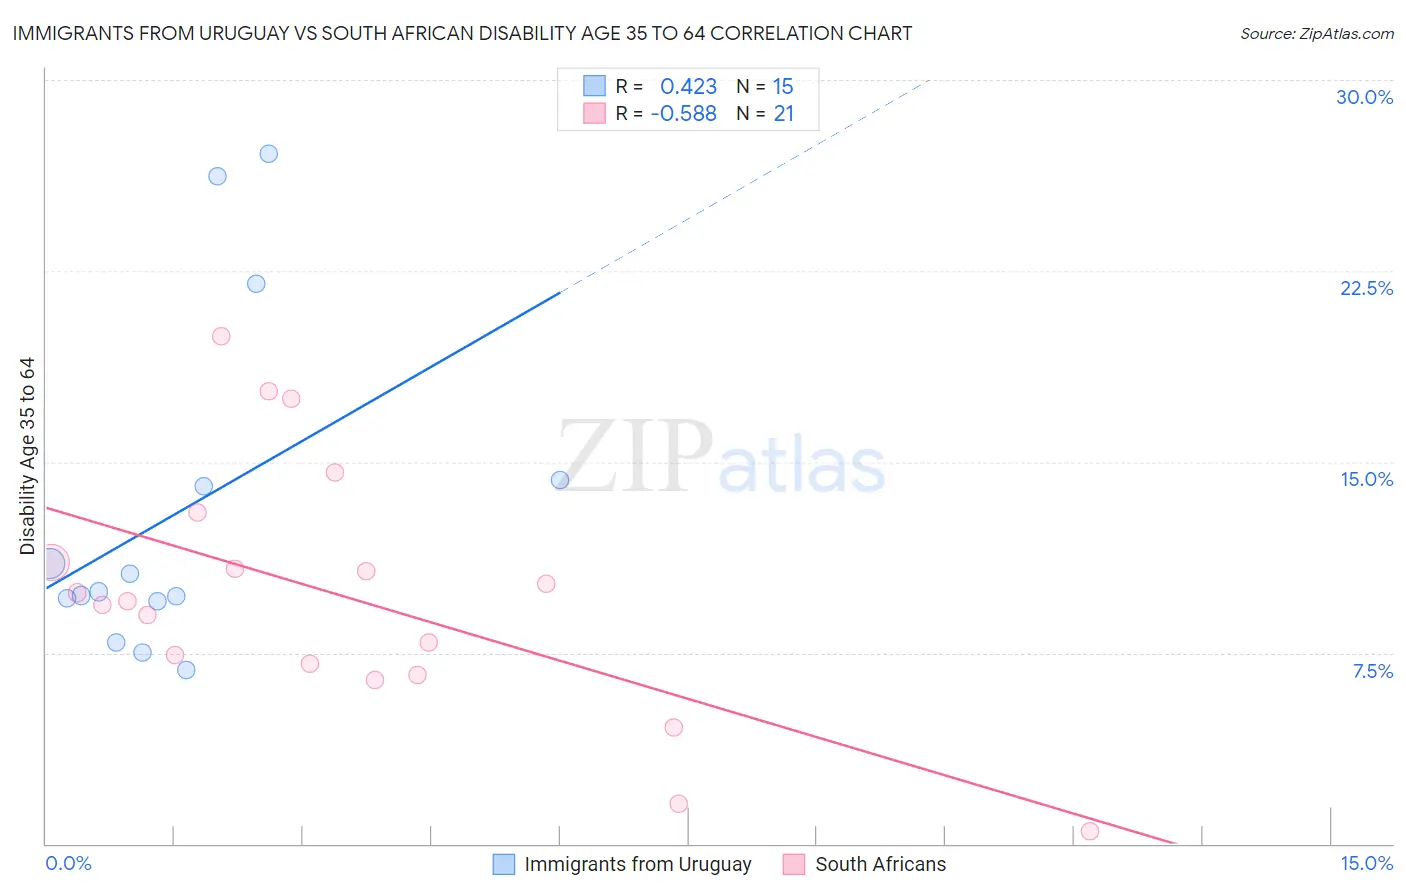 Immigrants from Uruguay vs South African Disability Age 35 to 64